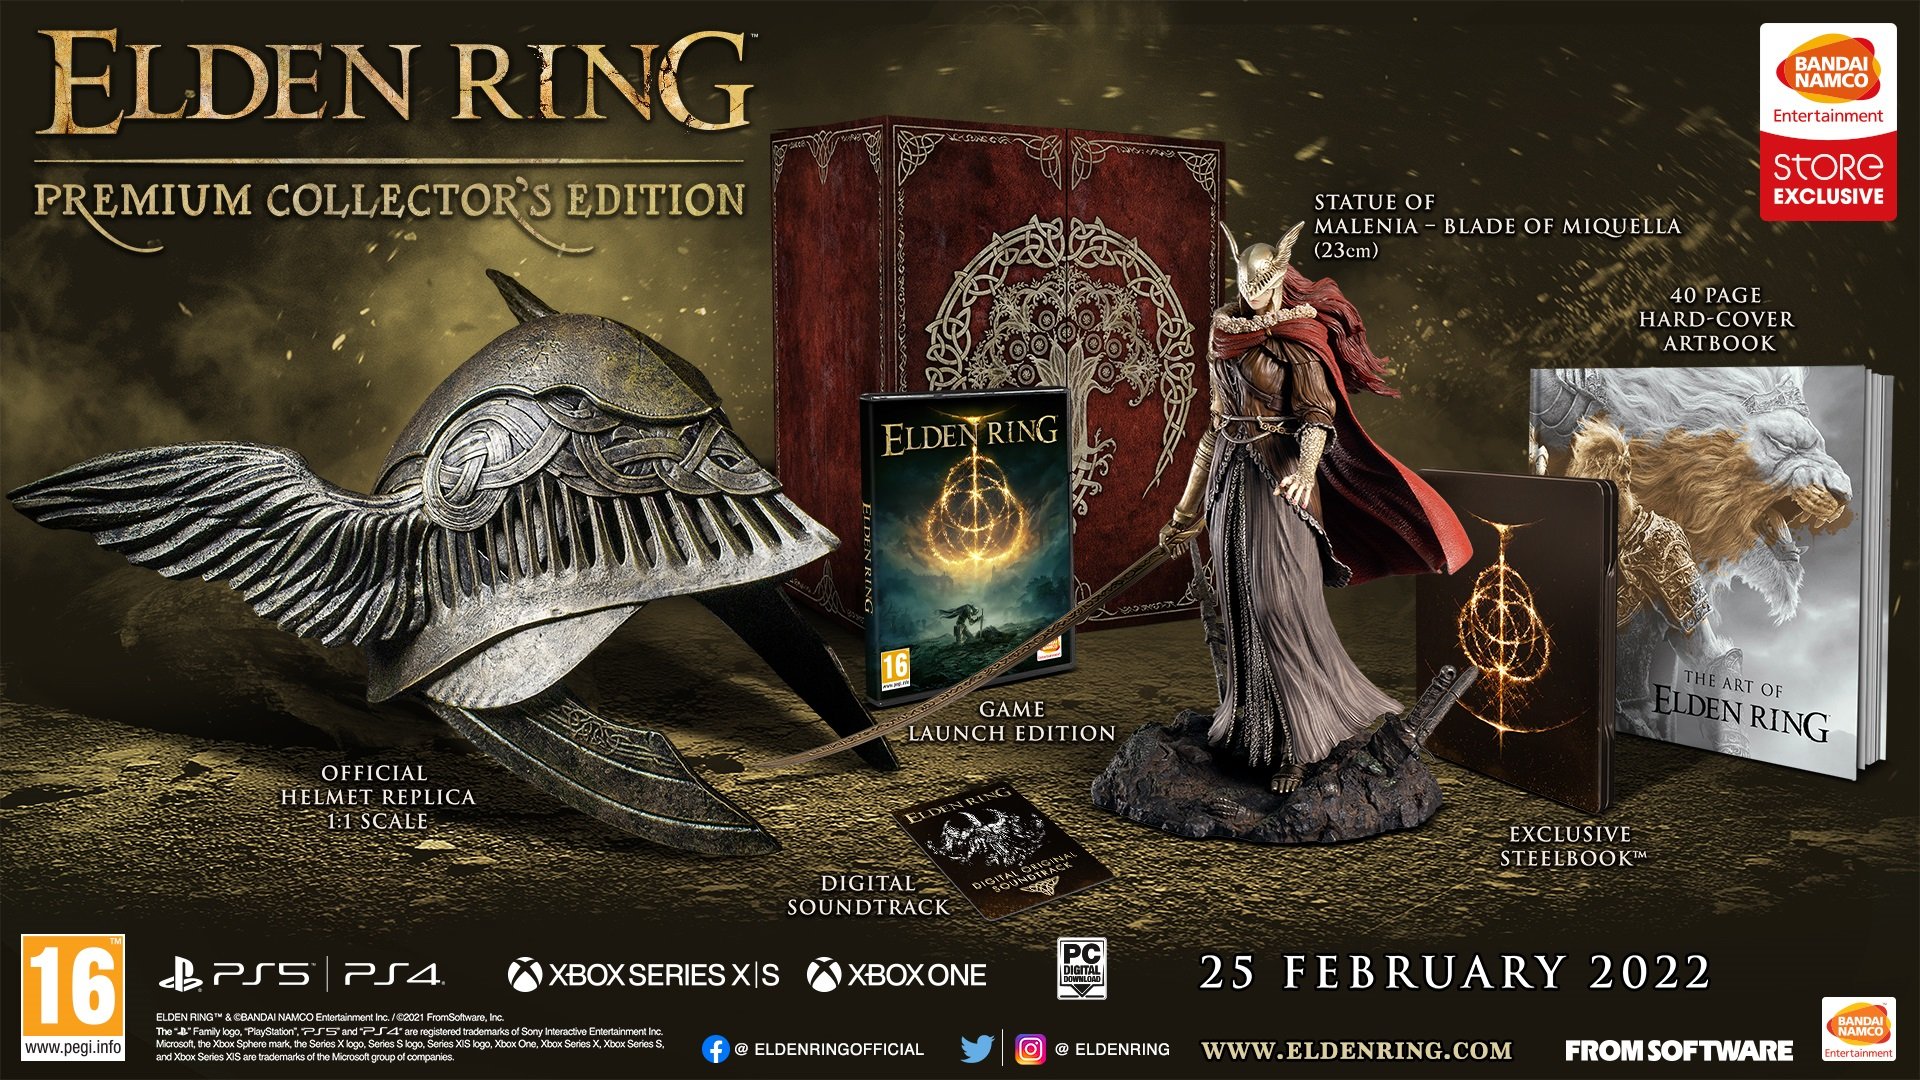 Elden Ring Global Release Schedule Reveals What Time You Can Start Playing